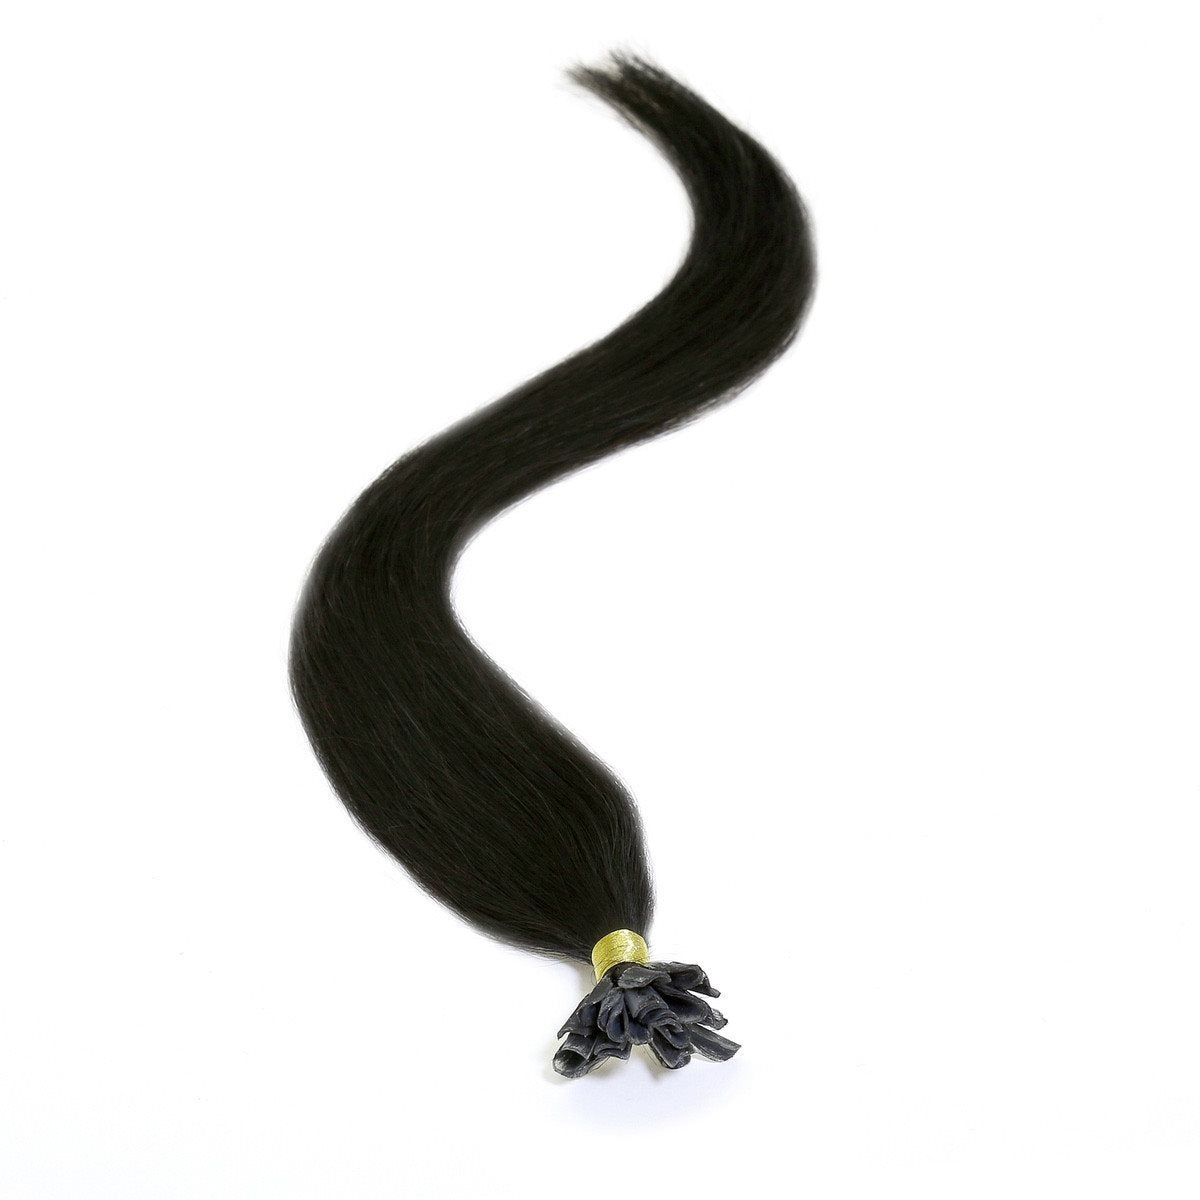 U Tip Hair Extensions 18" Jet Black (1) - Beauty Hair Products LtdHair Extensions